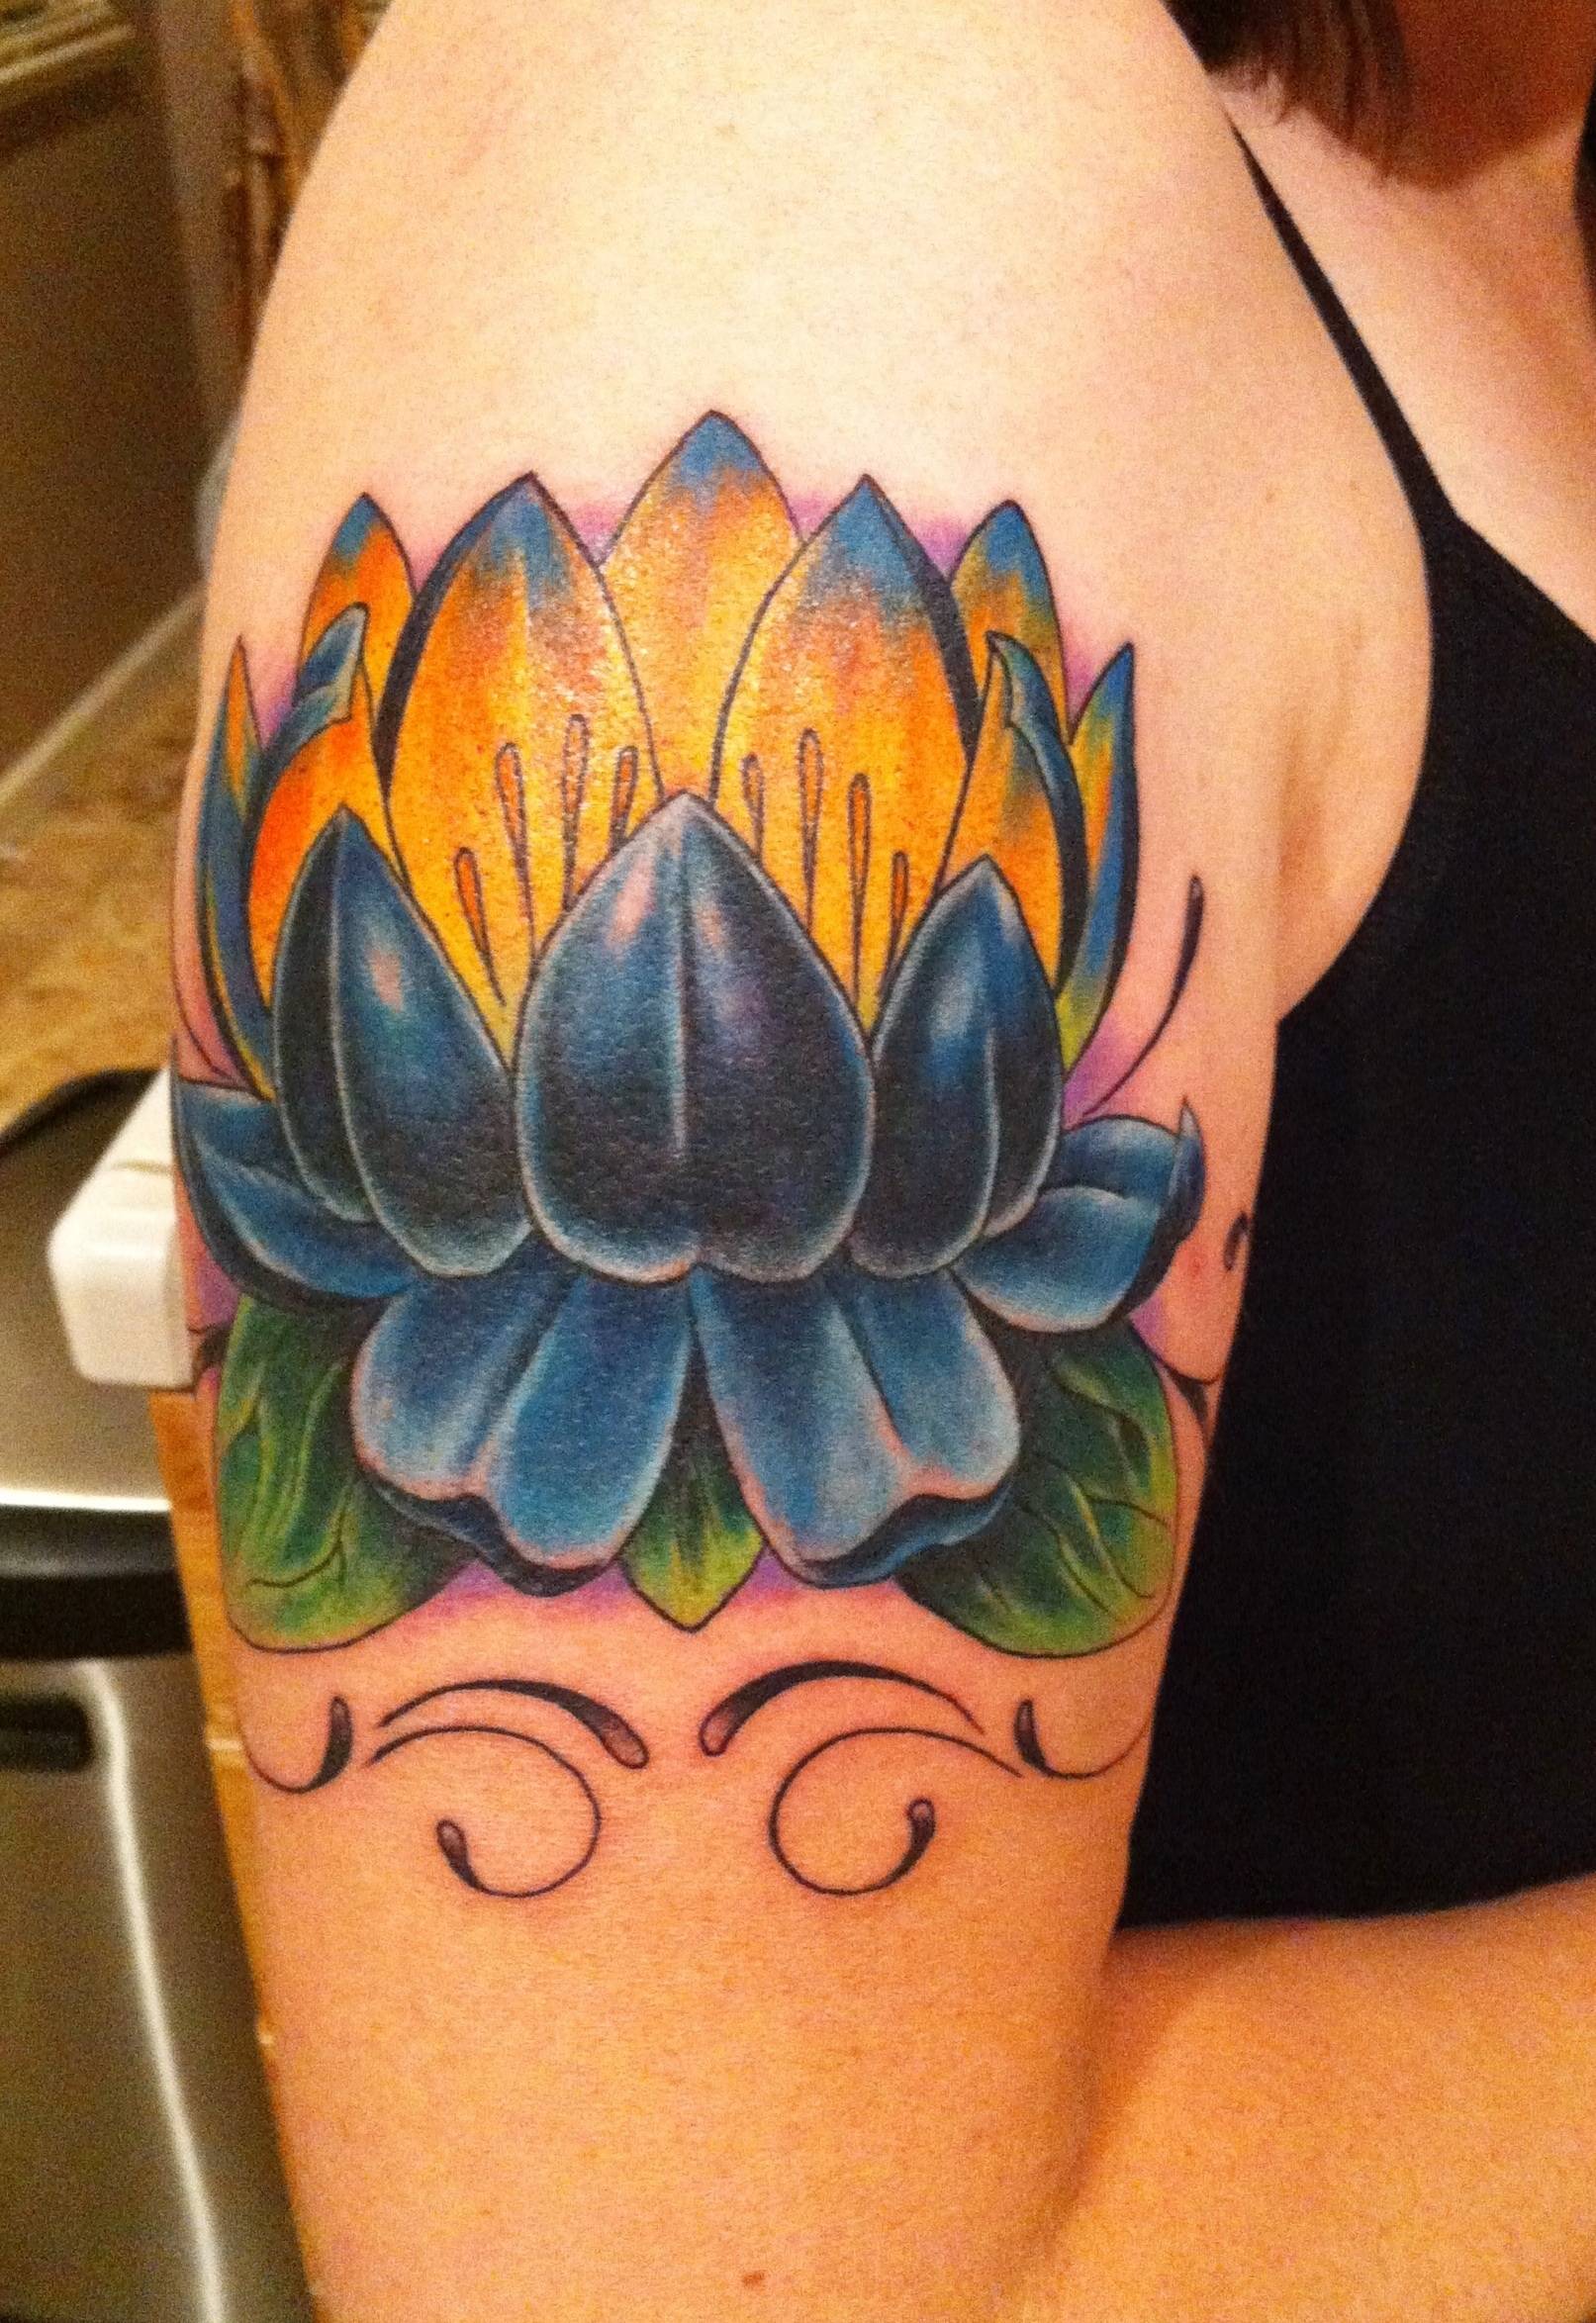 Lotus Tattoos Designs, Ideas and Meaning | Tattoos For You